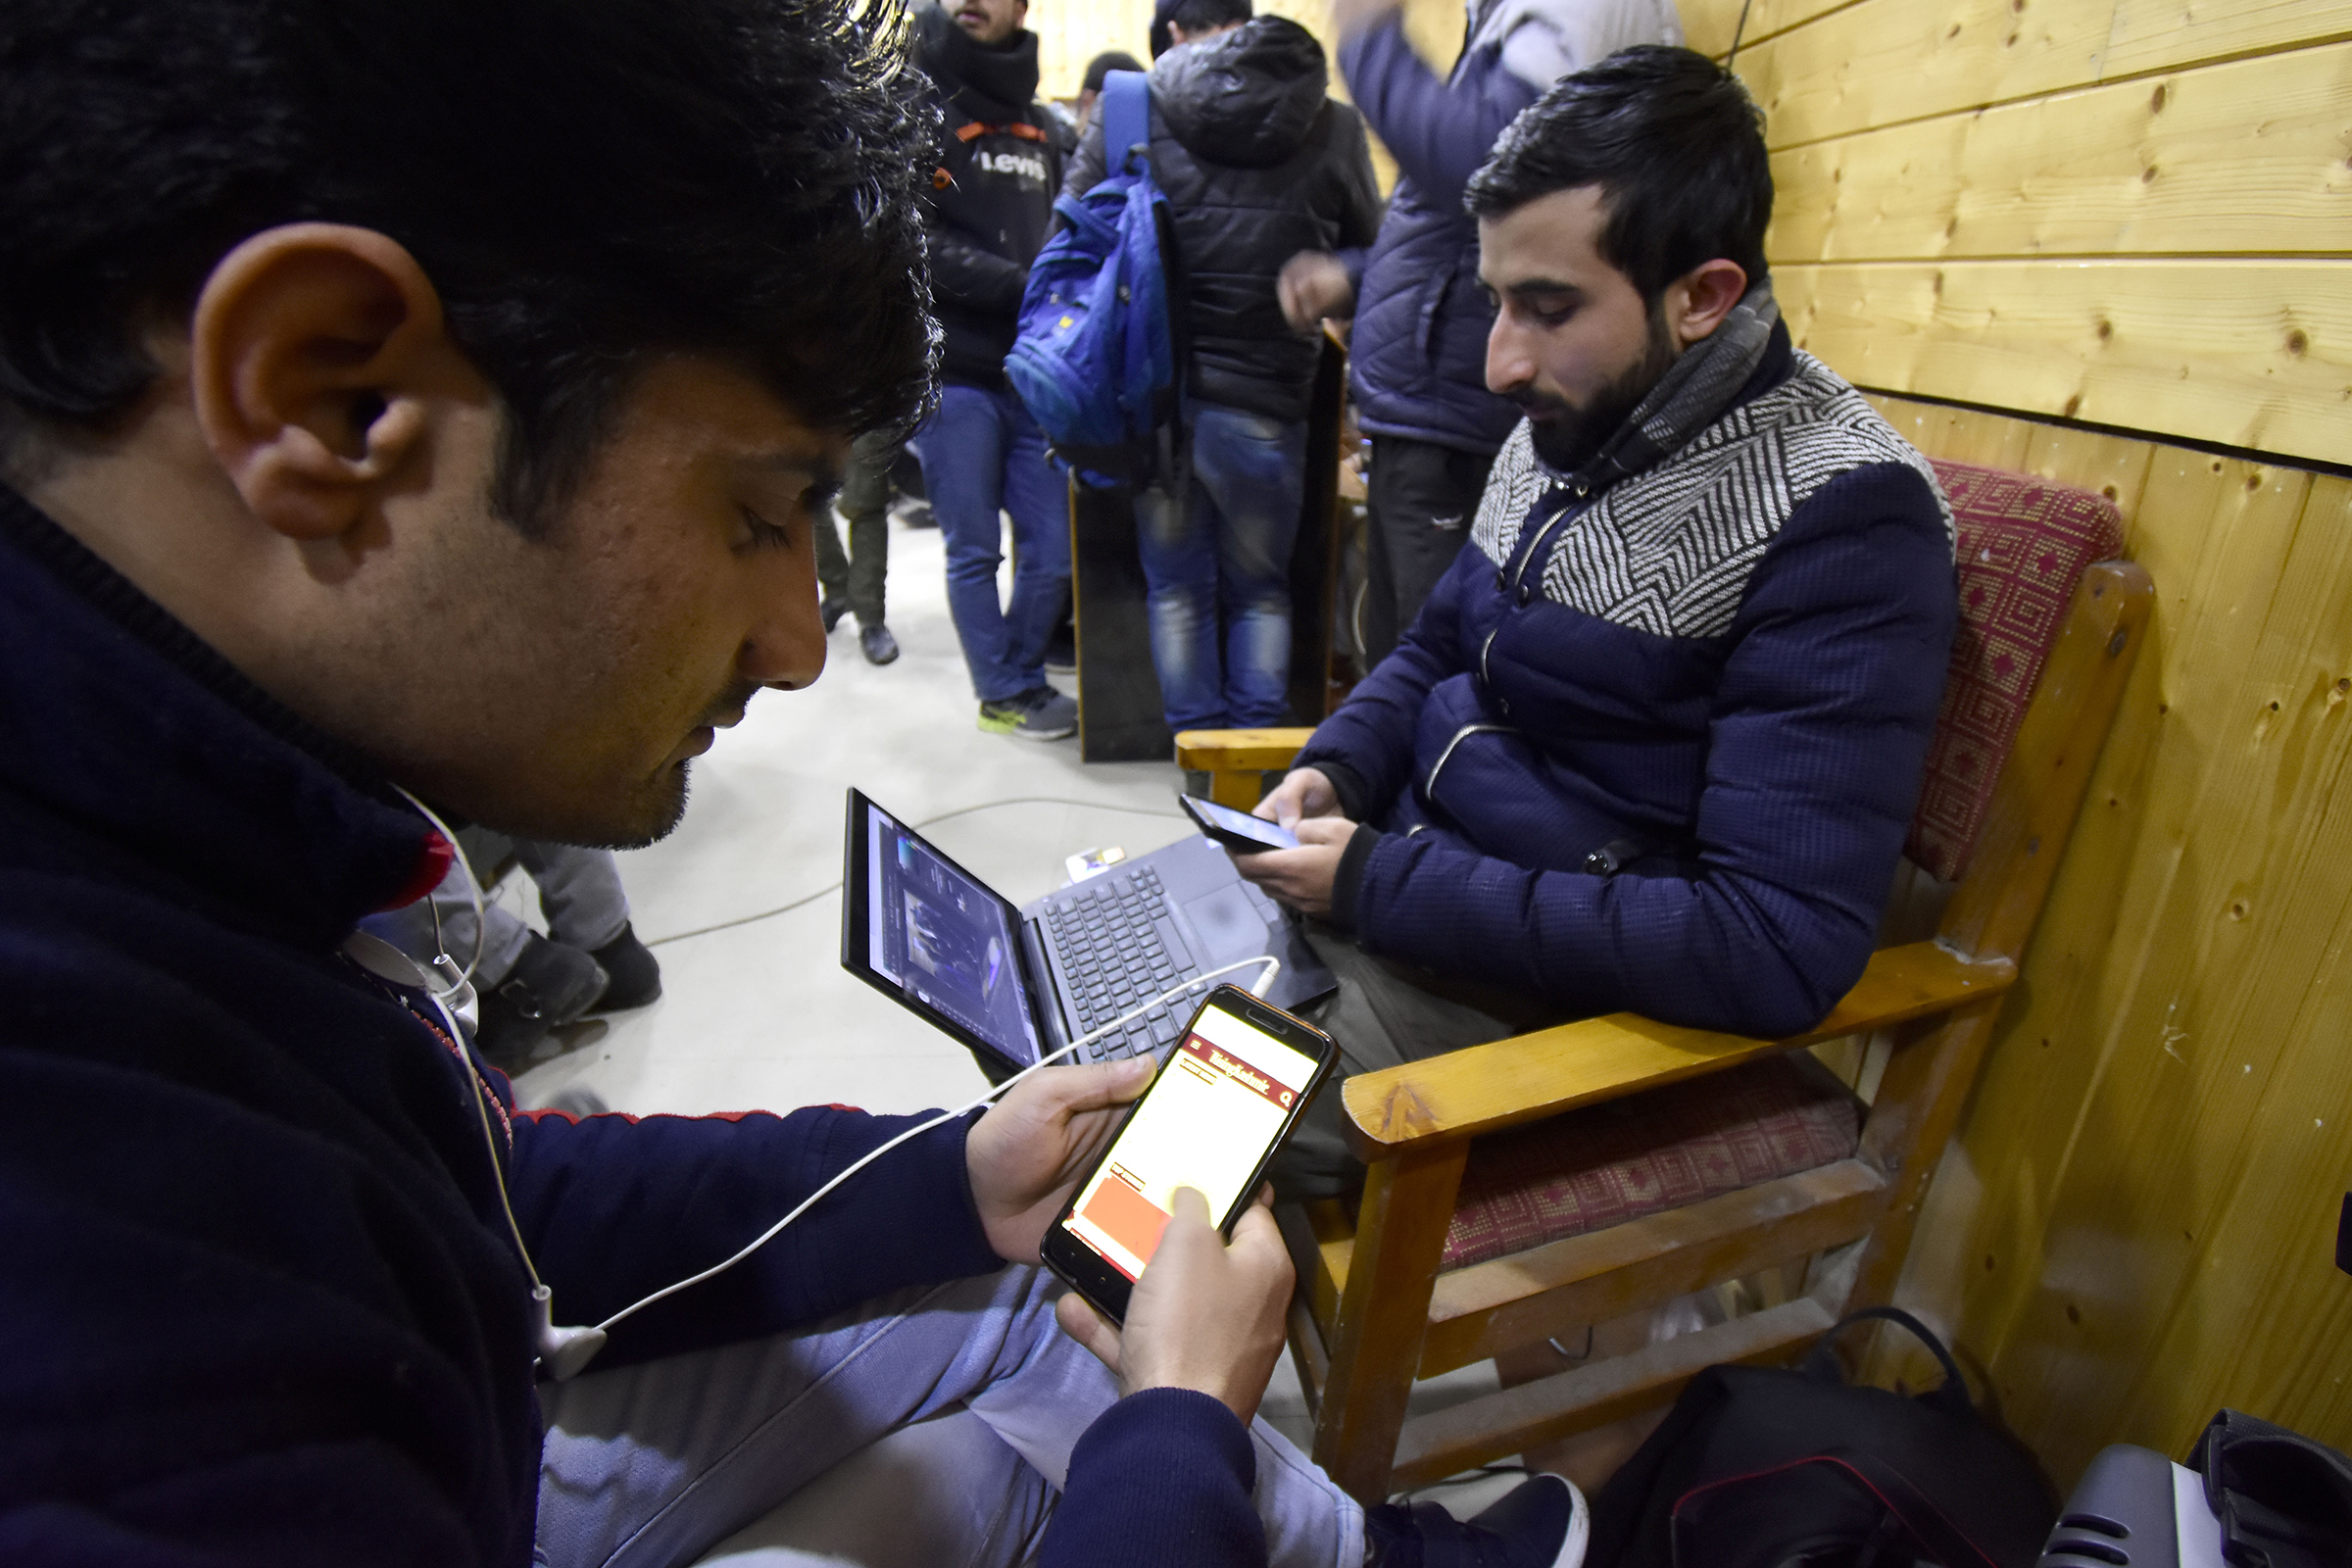 Kashmiri people look at their mobile phones after authorities restored low speed mobile internet services in the Kashmir Valley on Jan. 25, 2020. (Muzamil Mattoo—NurPhoto via Getty Images)